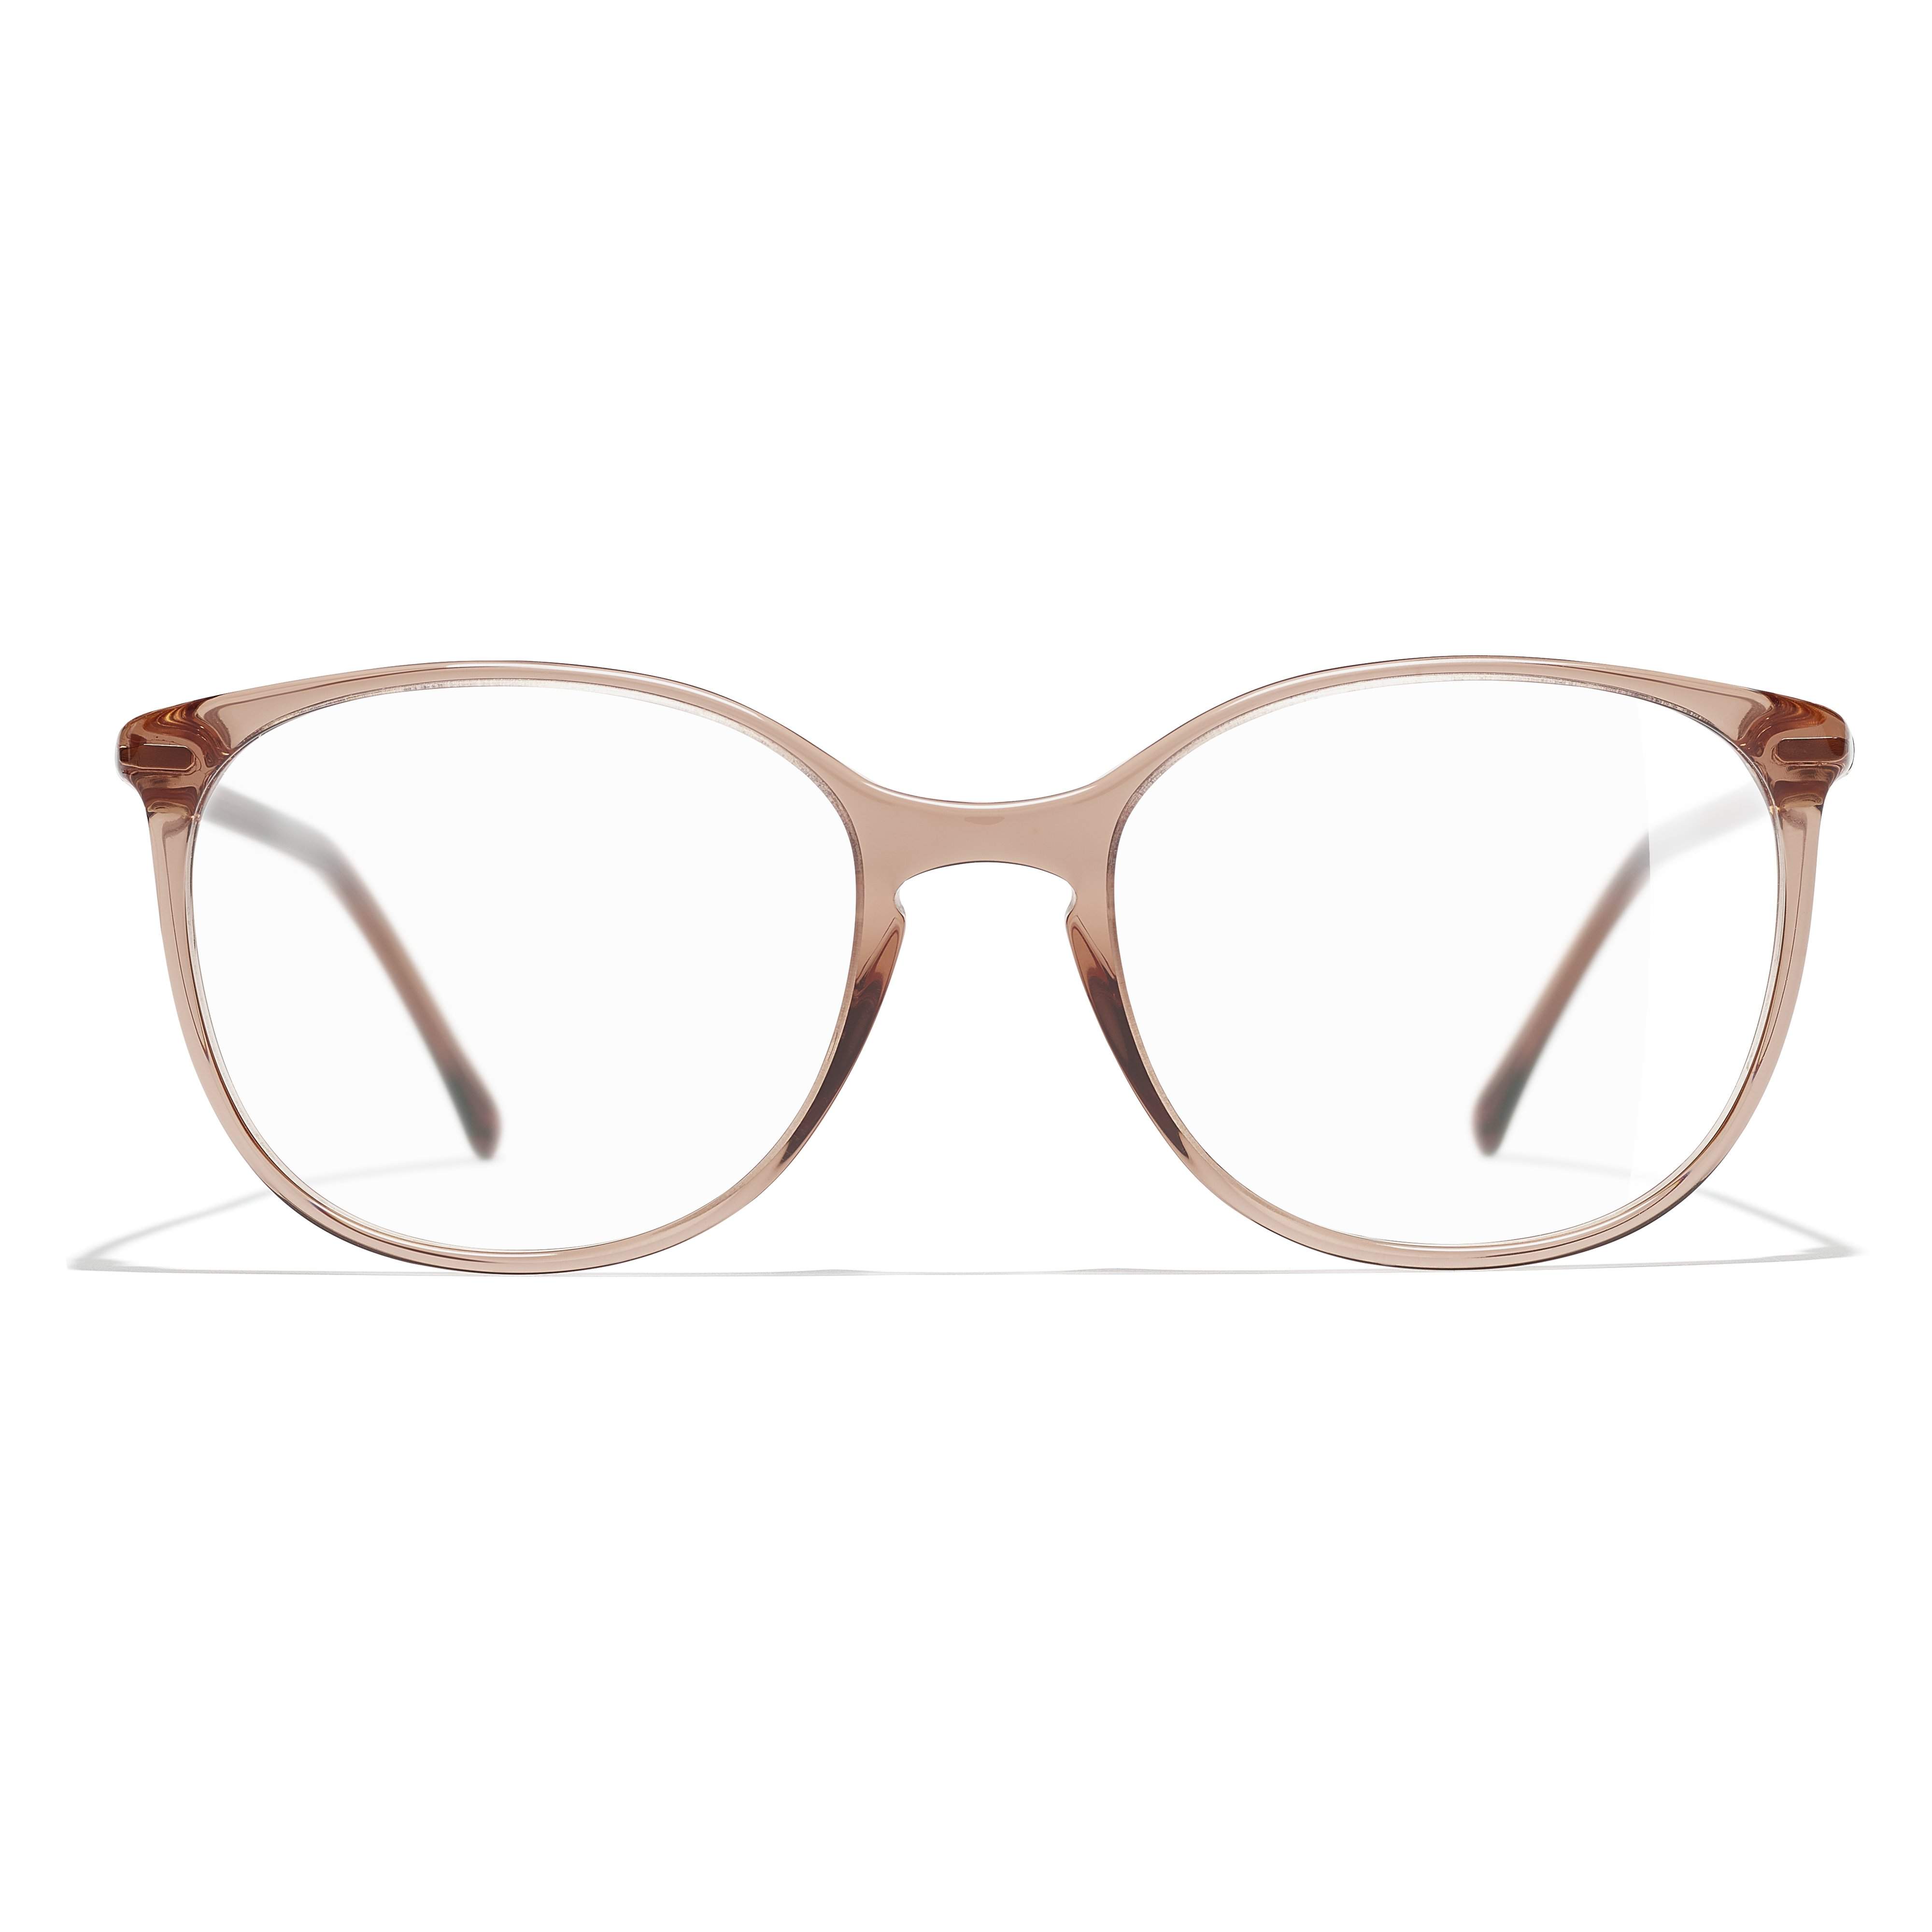 Eyeglasses Chanel Signature Brown CH3282 1651 52-18 in stock, Price 158,33  €